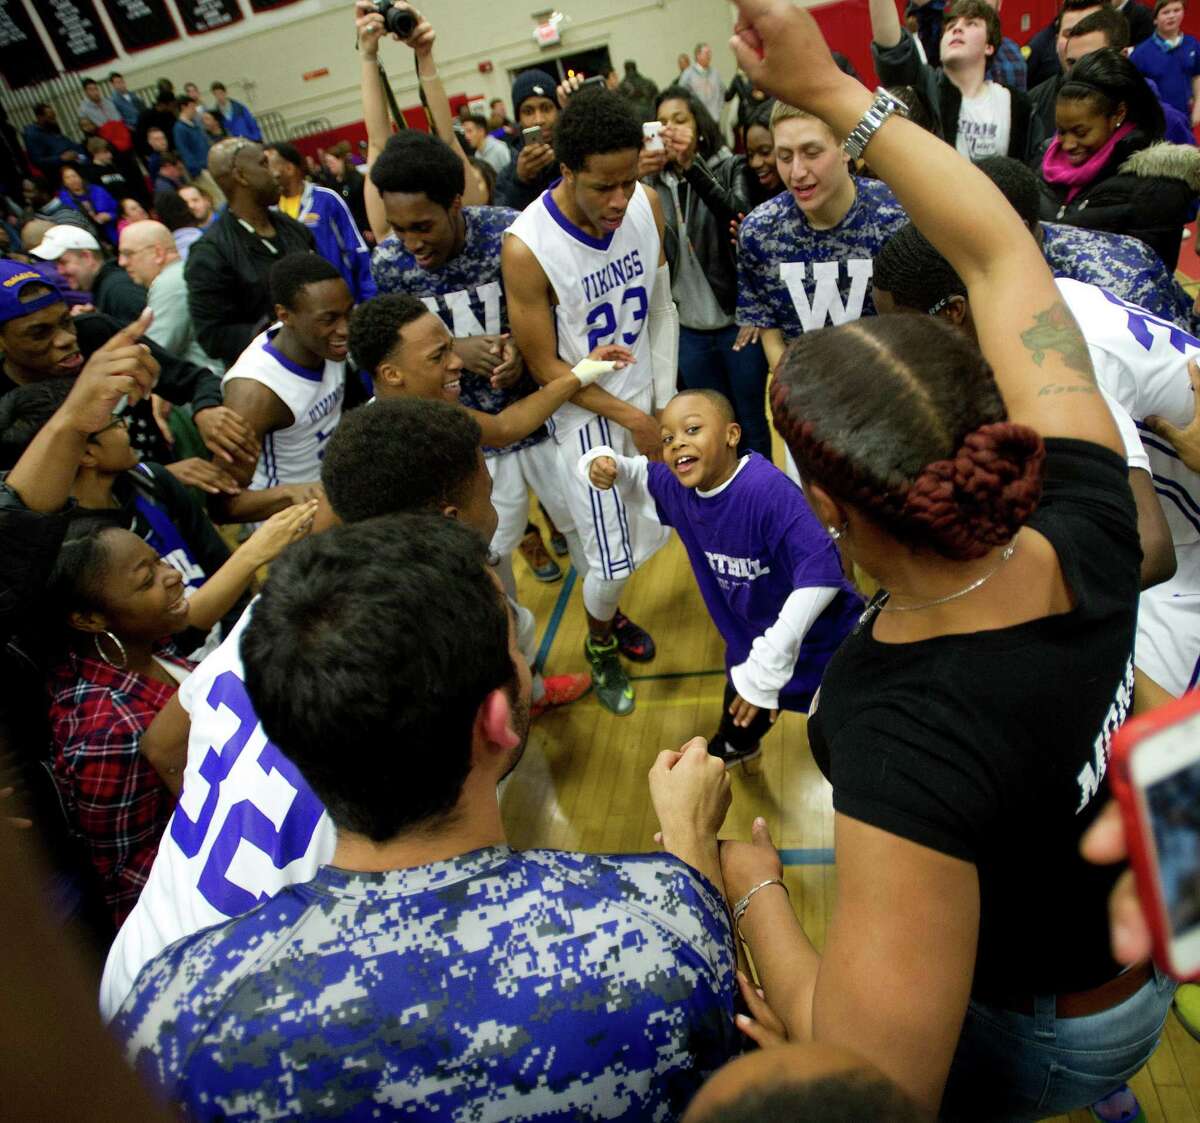 Westhill players surround Raheem Hargrove-Murray, 7, as they dance to celebrate winning Friday's FCIAC Boys Basketball Championship game between Westhill and Norwalk High Schools at Fairfield Warde High School in Fairfield, Conn., on Friday, March 6, 2015.